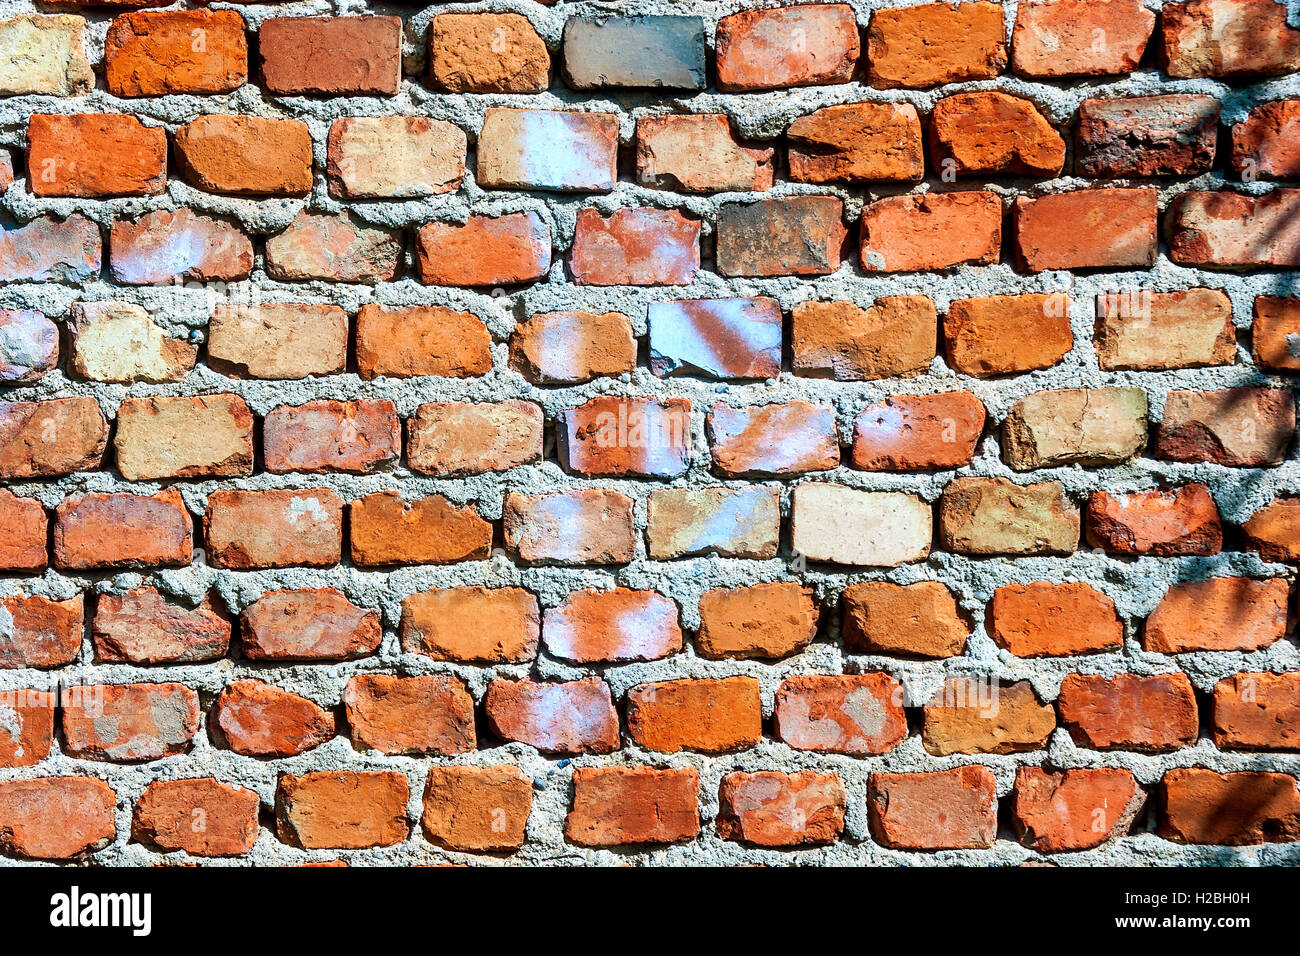 Old, rough red brick wall Stock Photo